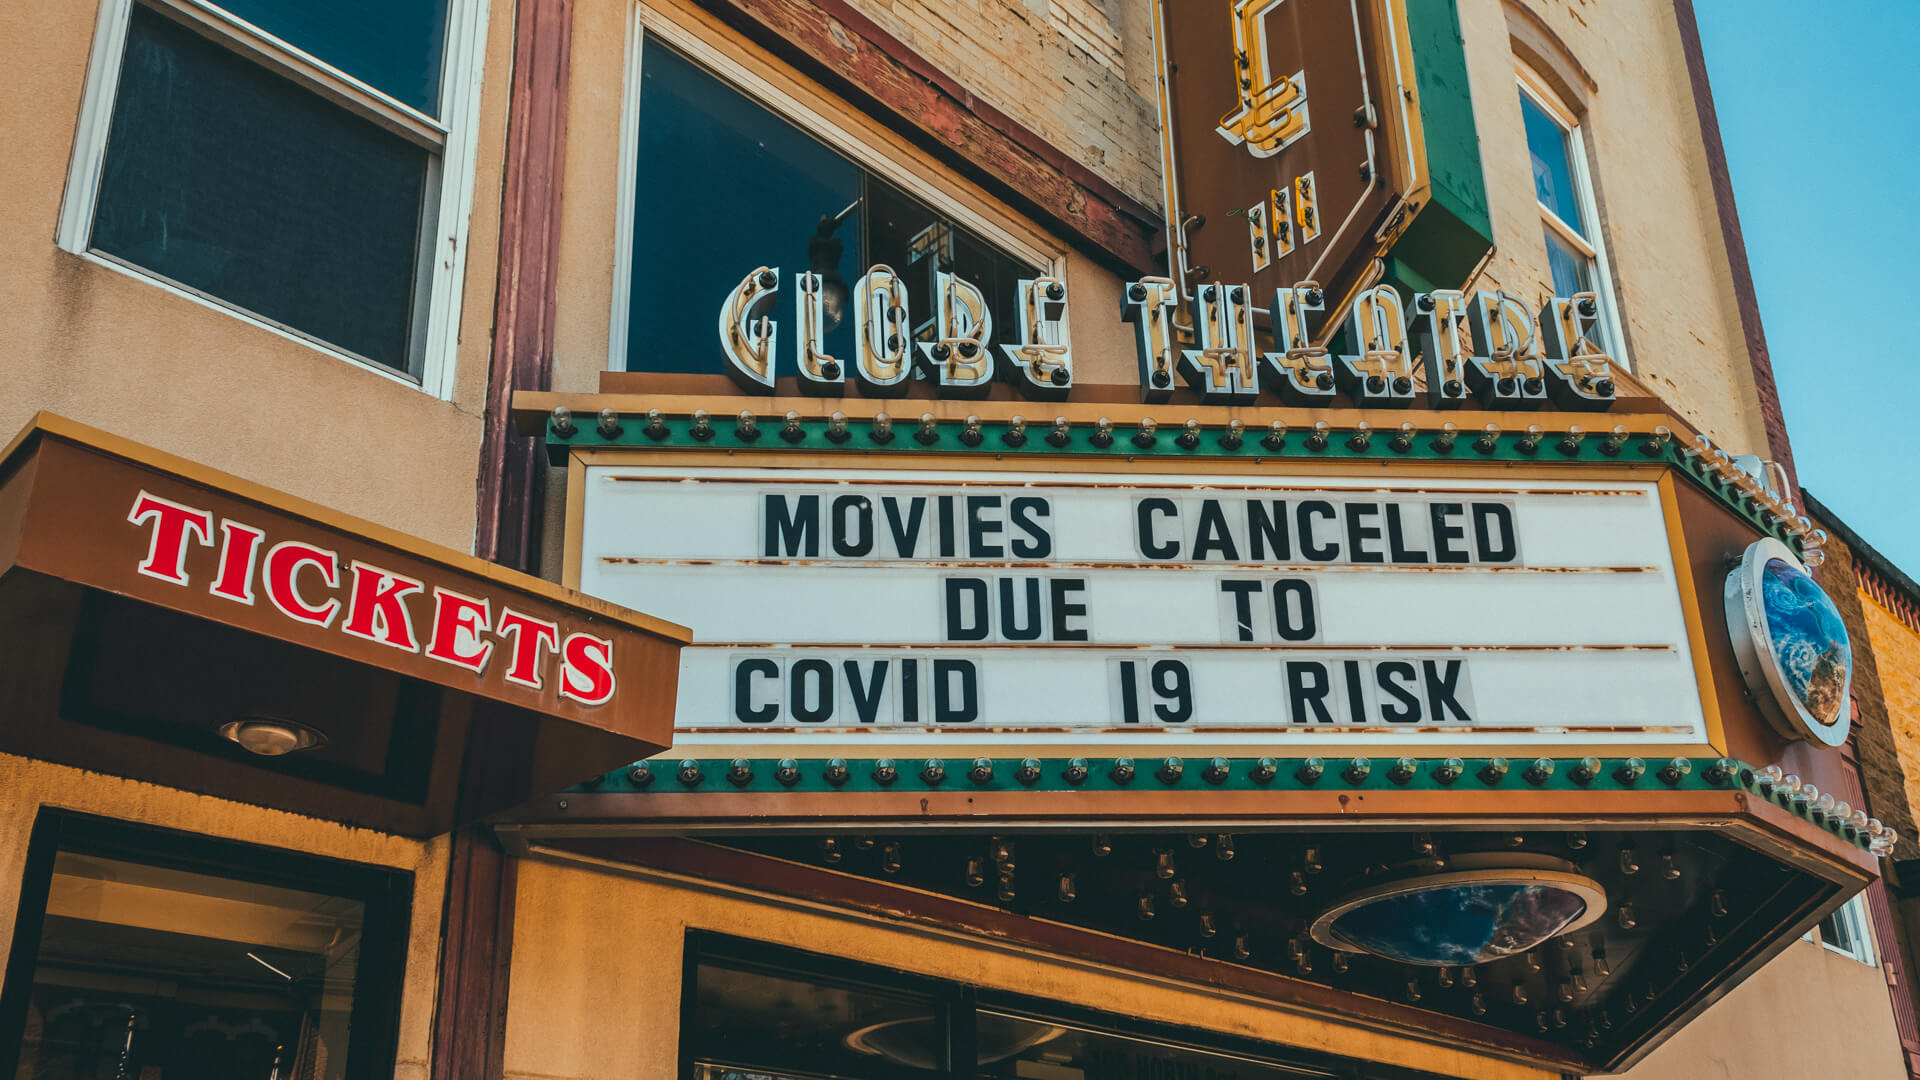 Are You Ready To Go Back to Movie Theaters? Take Our Poll | GOBankingRates